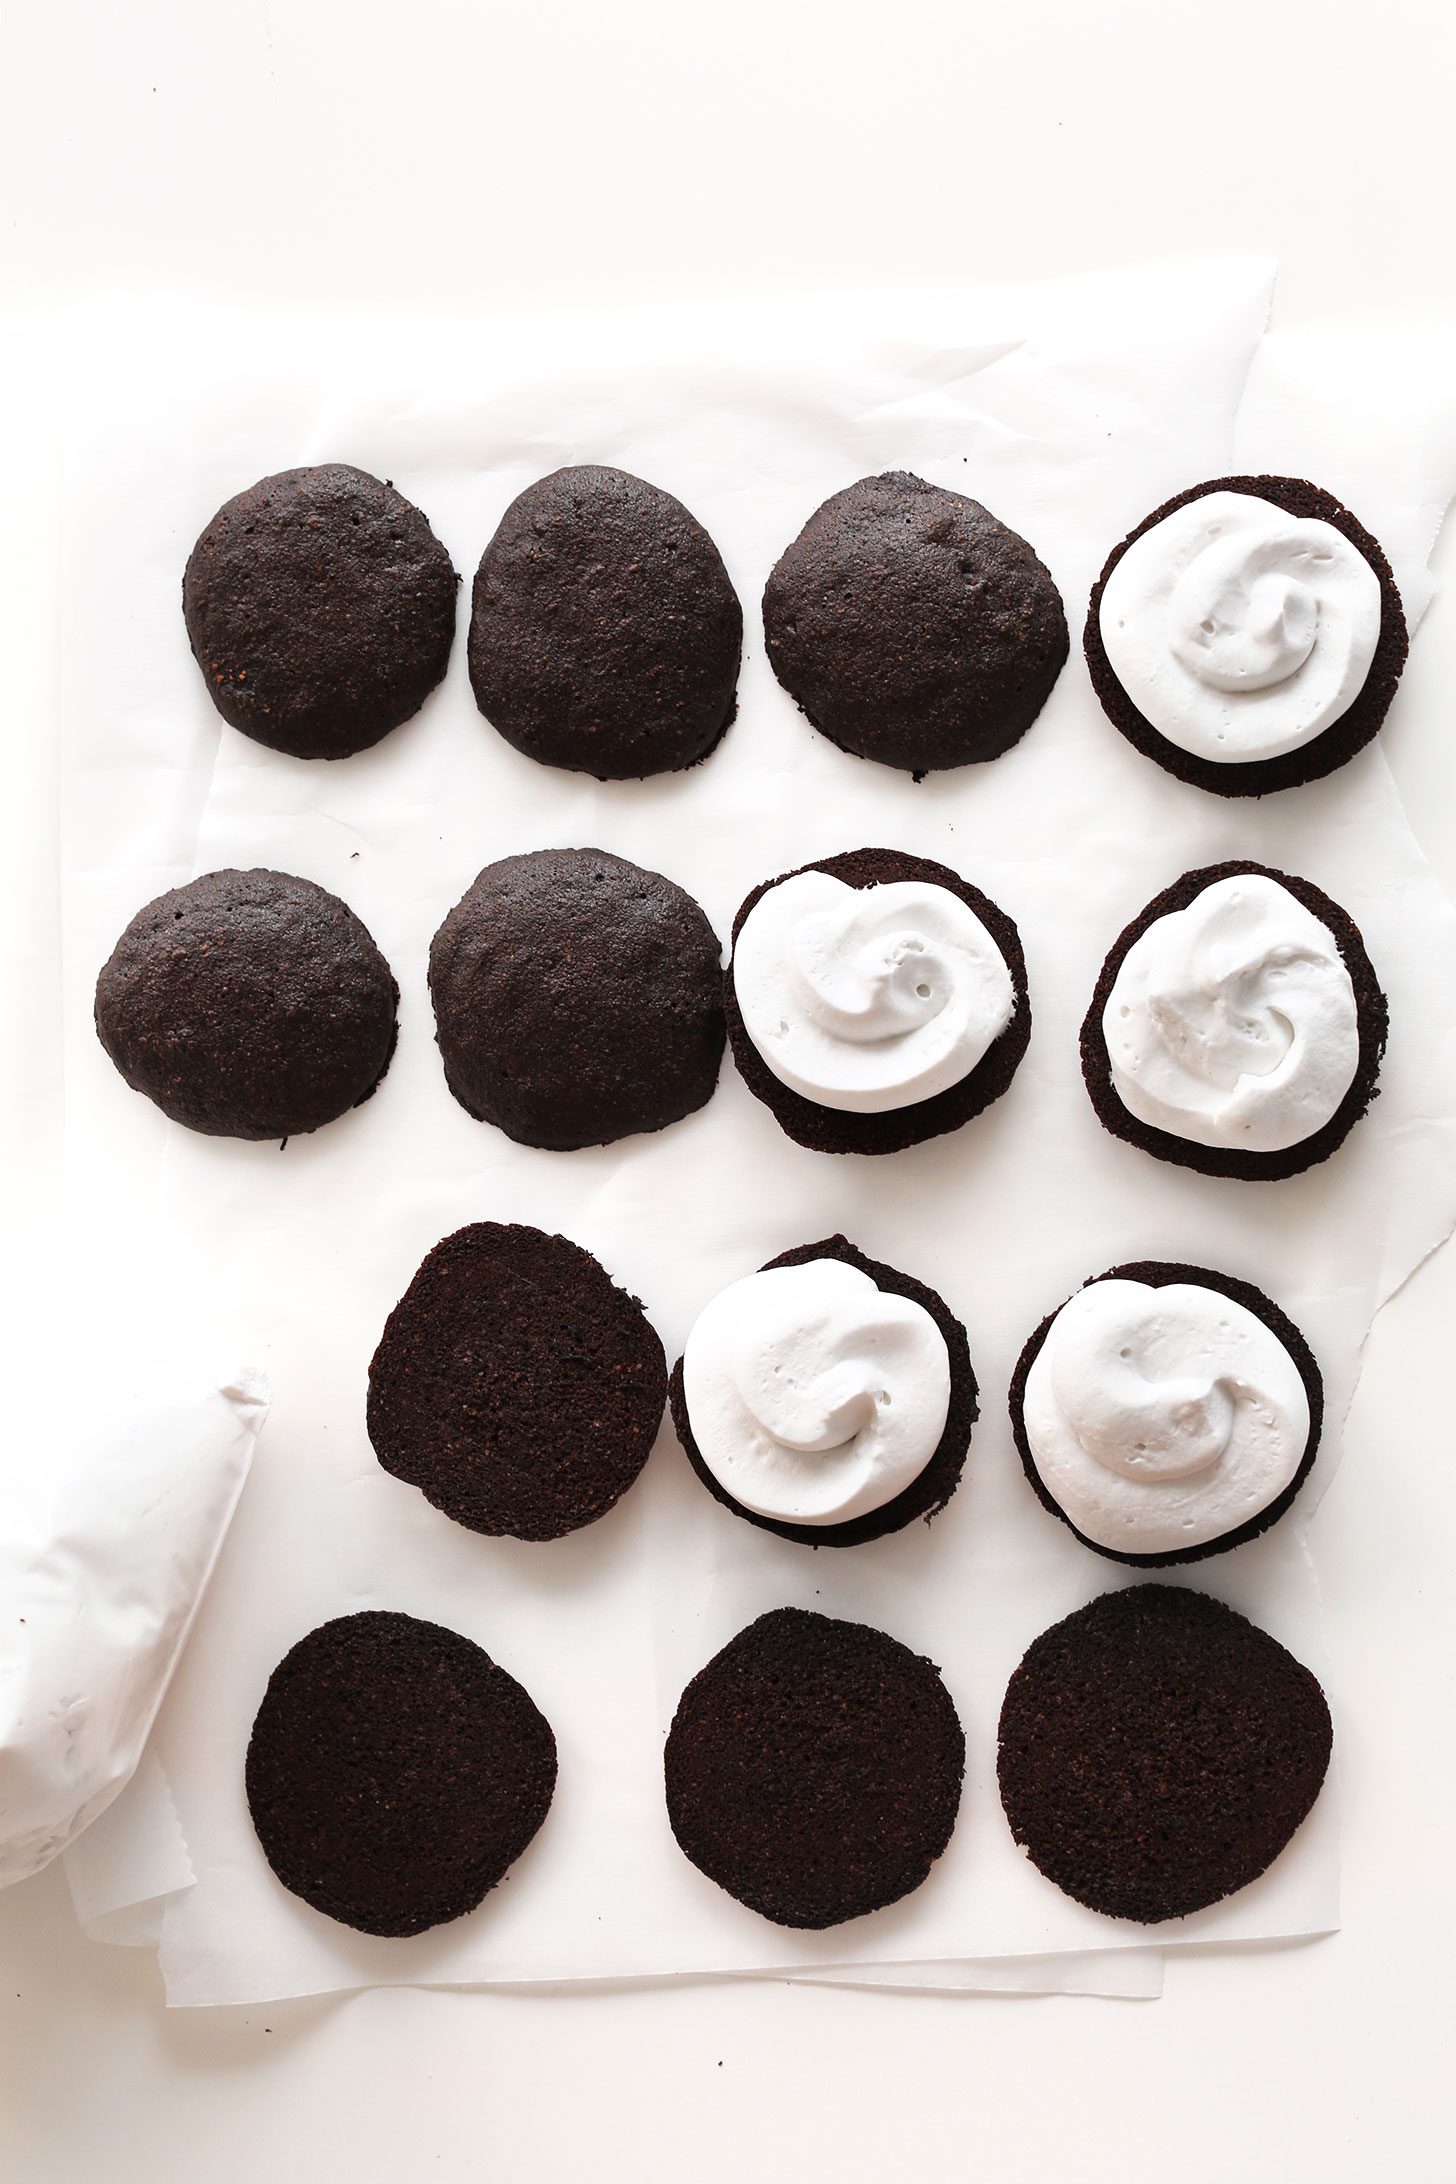 Cake portion of vegan whoopie pies- some of which have a swirl of coconut whipped cream